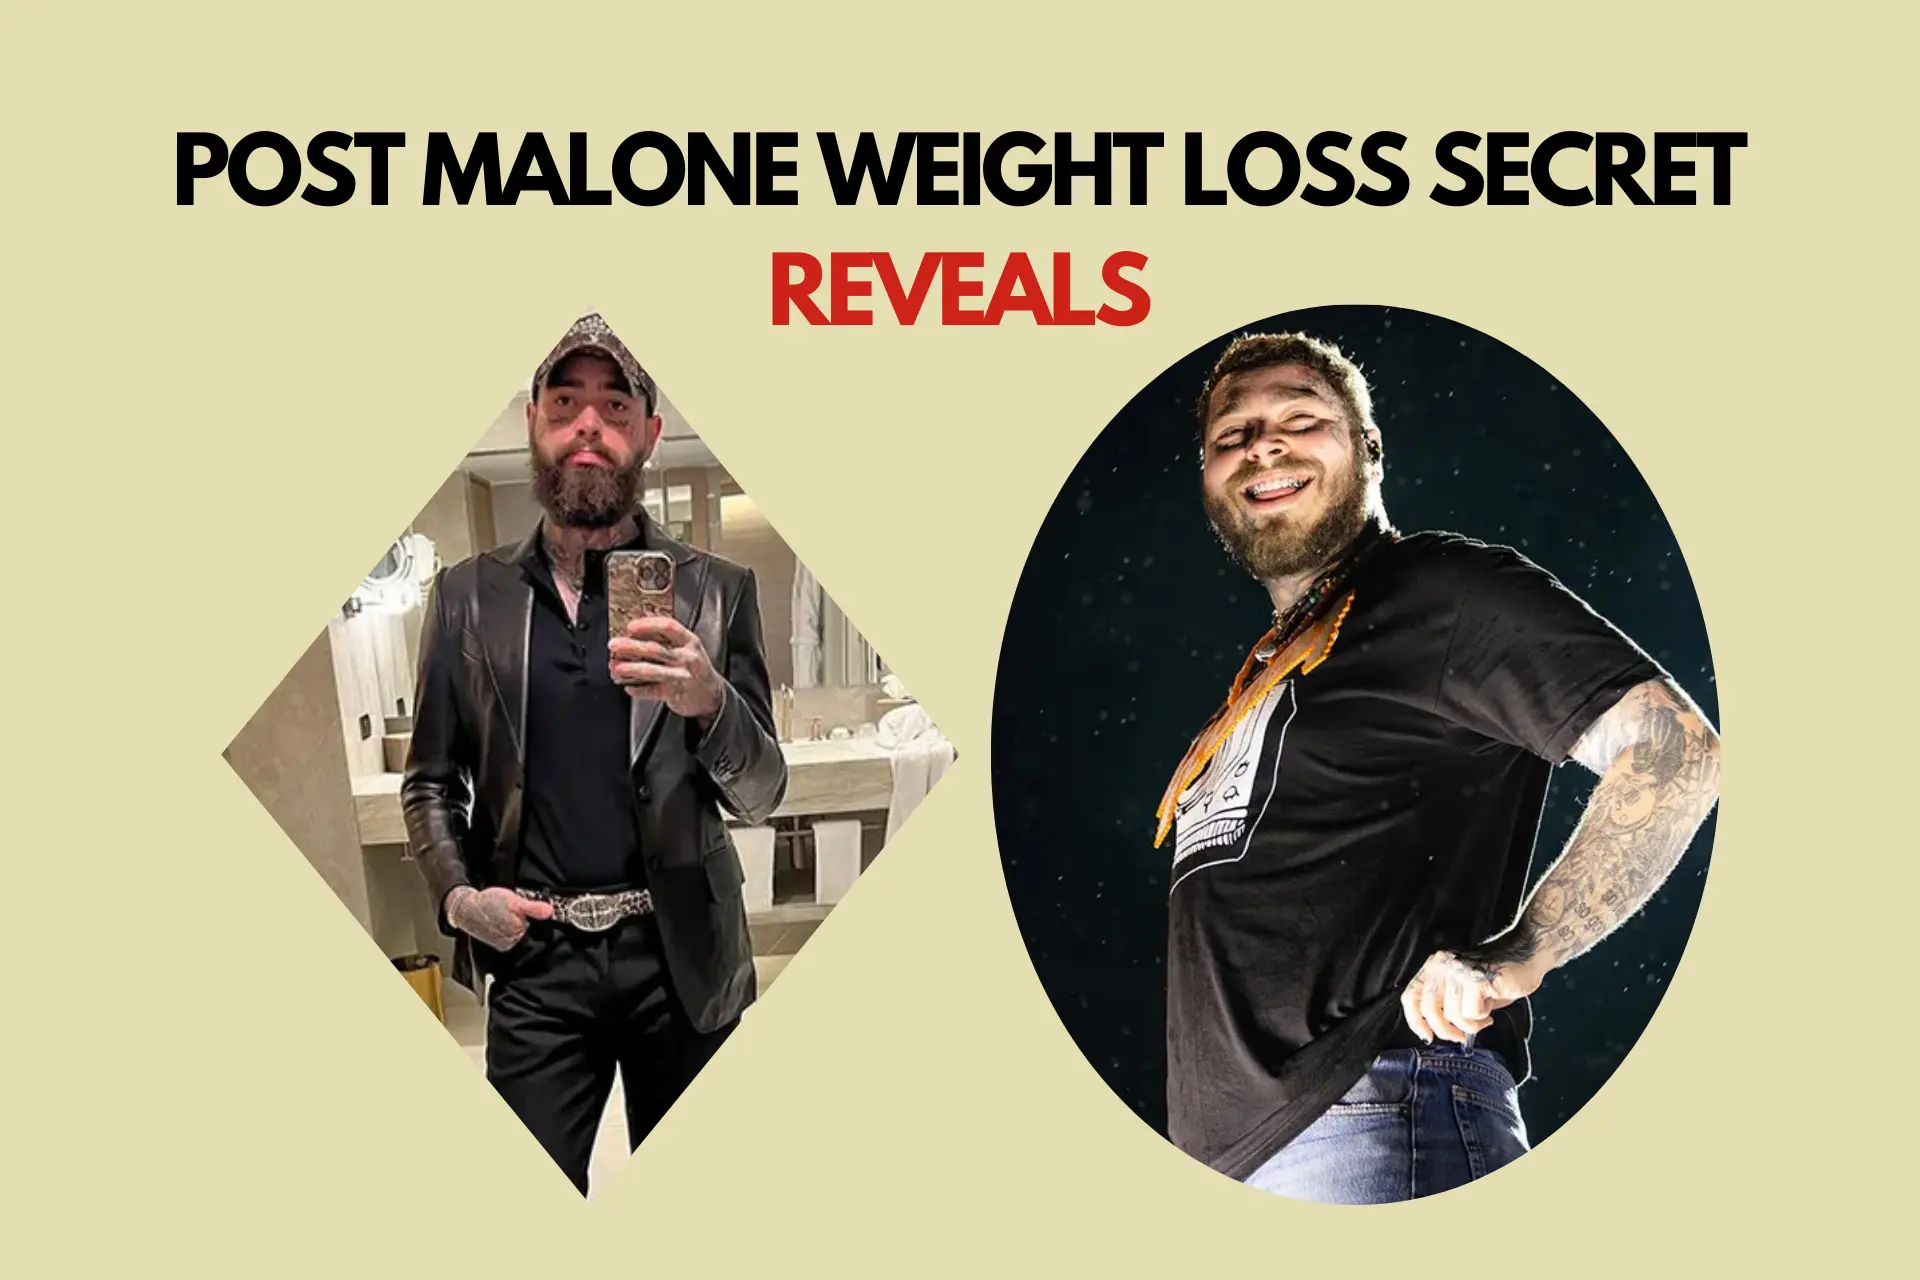 You are currently viewing Post Malone Weight Loss Secret Reveals – Advised The Healthy Diet Tip to help lose weight